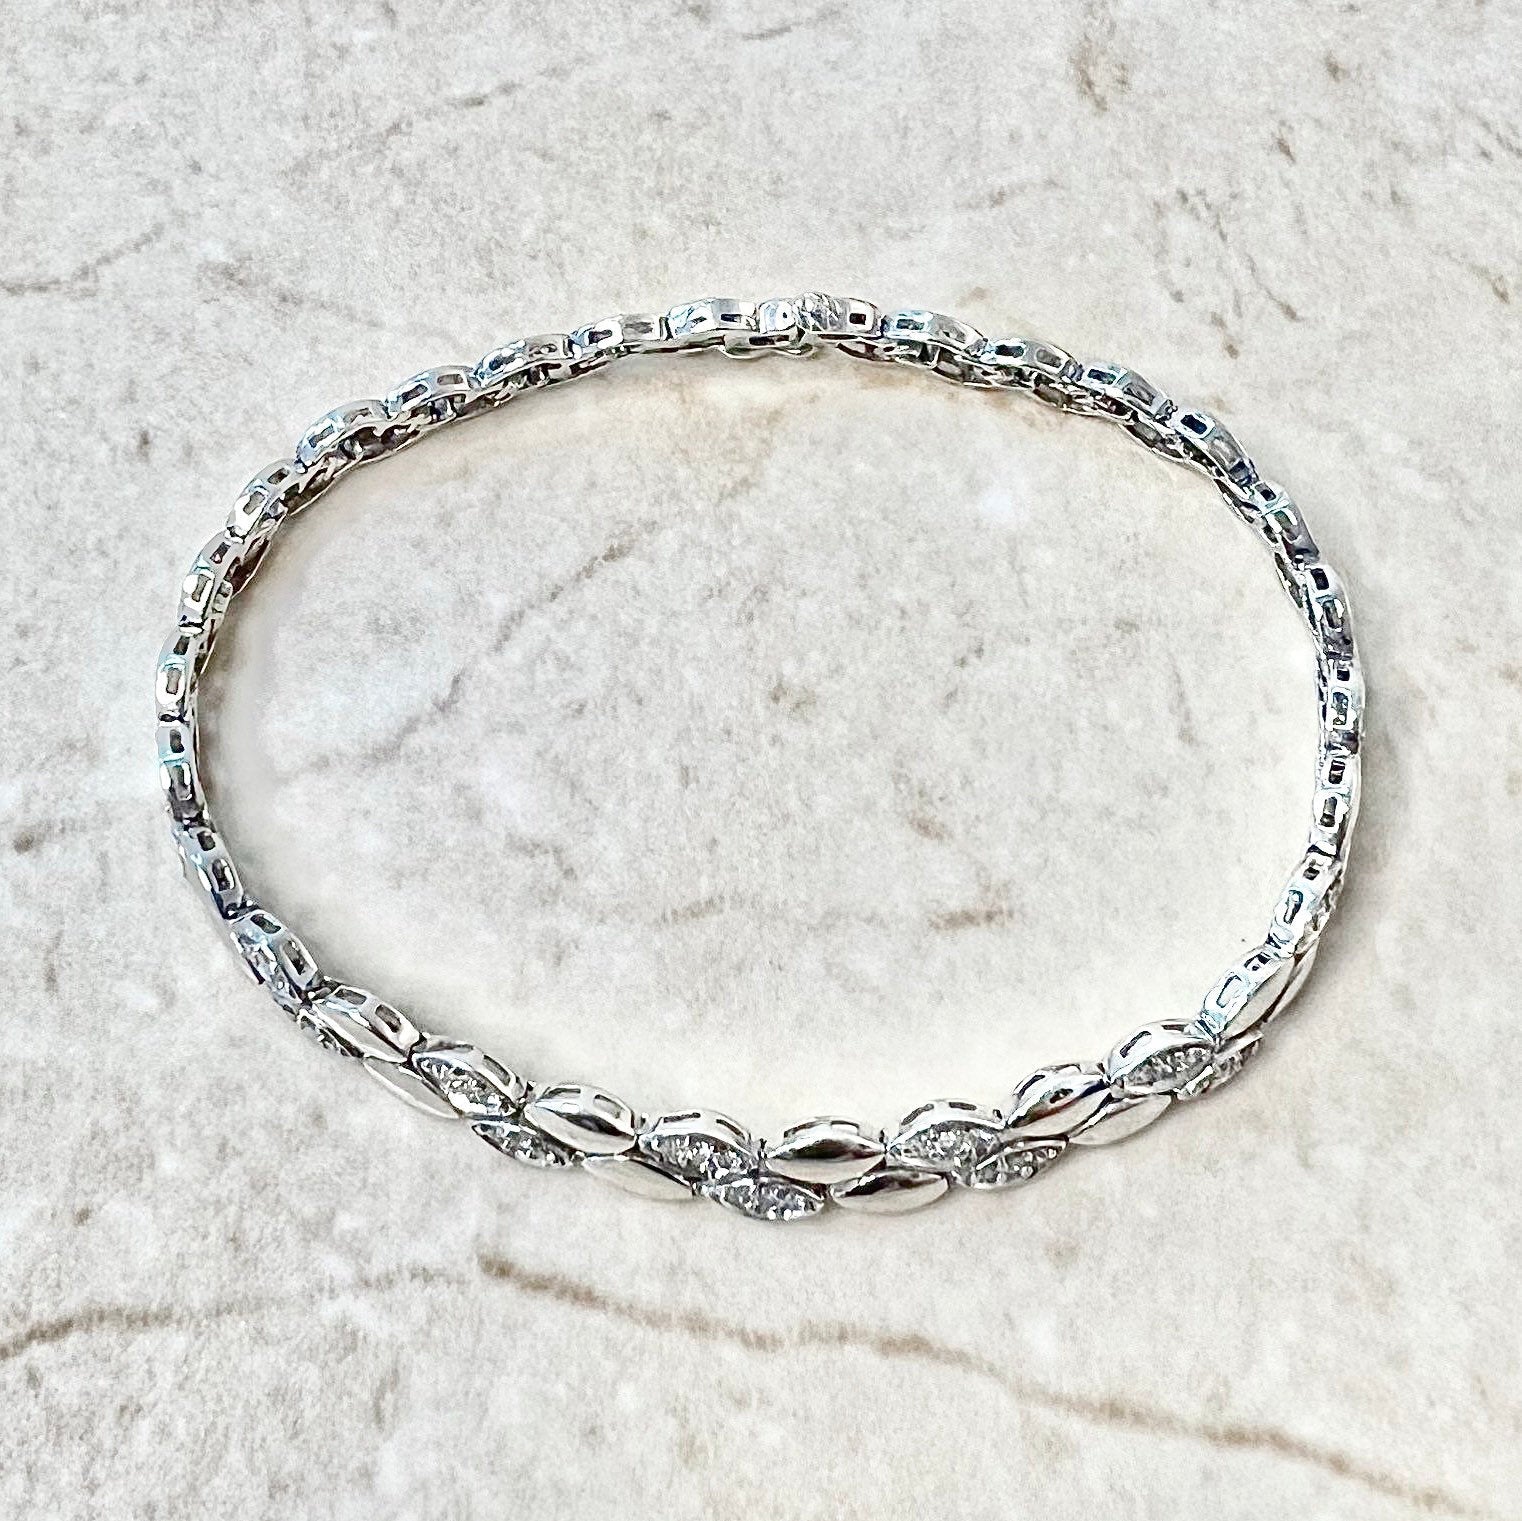 White Gold Cable Chain Bracelet Delicate Large Link Solid 14k White Gold  Bracelet Open Drawn Cable 14k White Gold Bracelet - Etsy